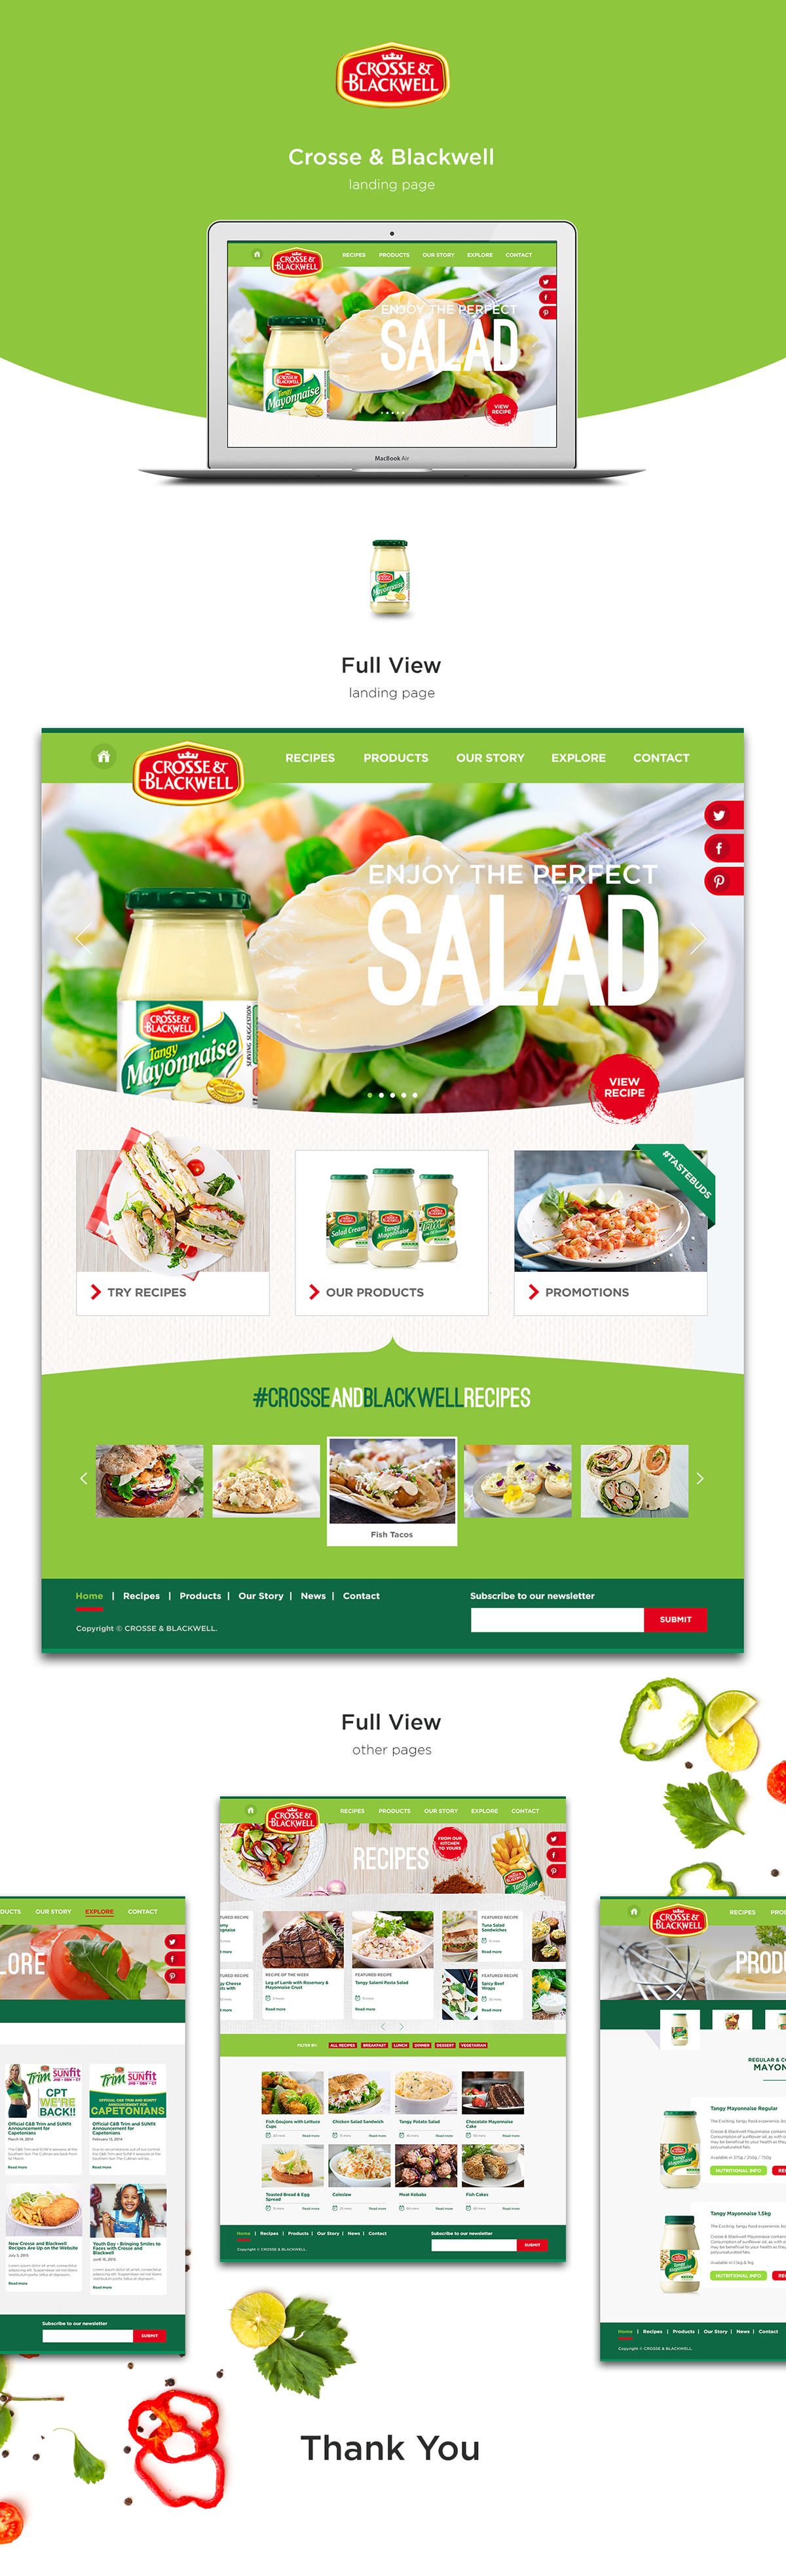 Crosse & Blackwell Website mayonnaise south africa